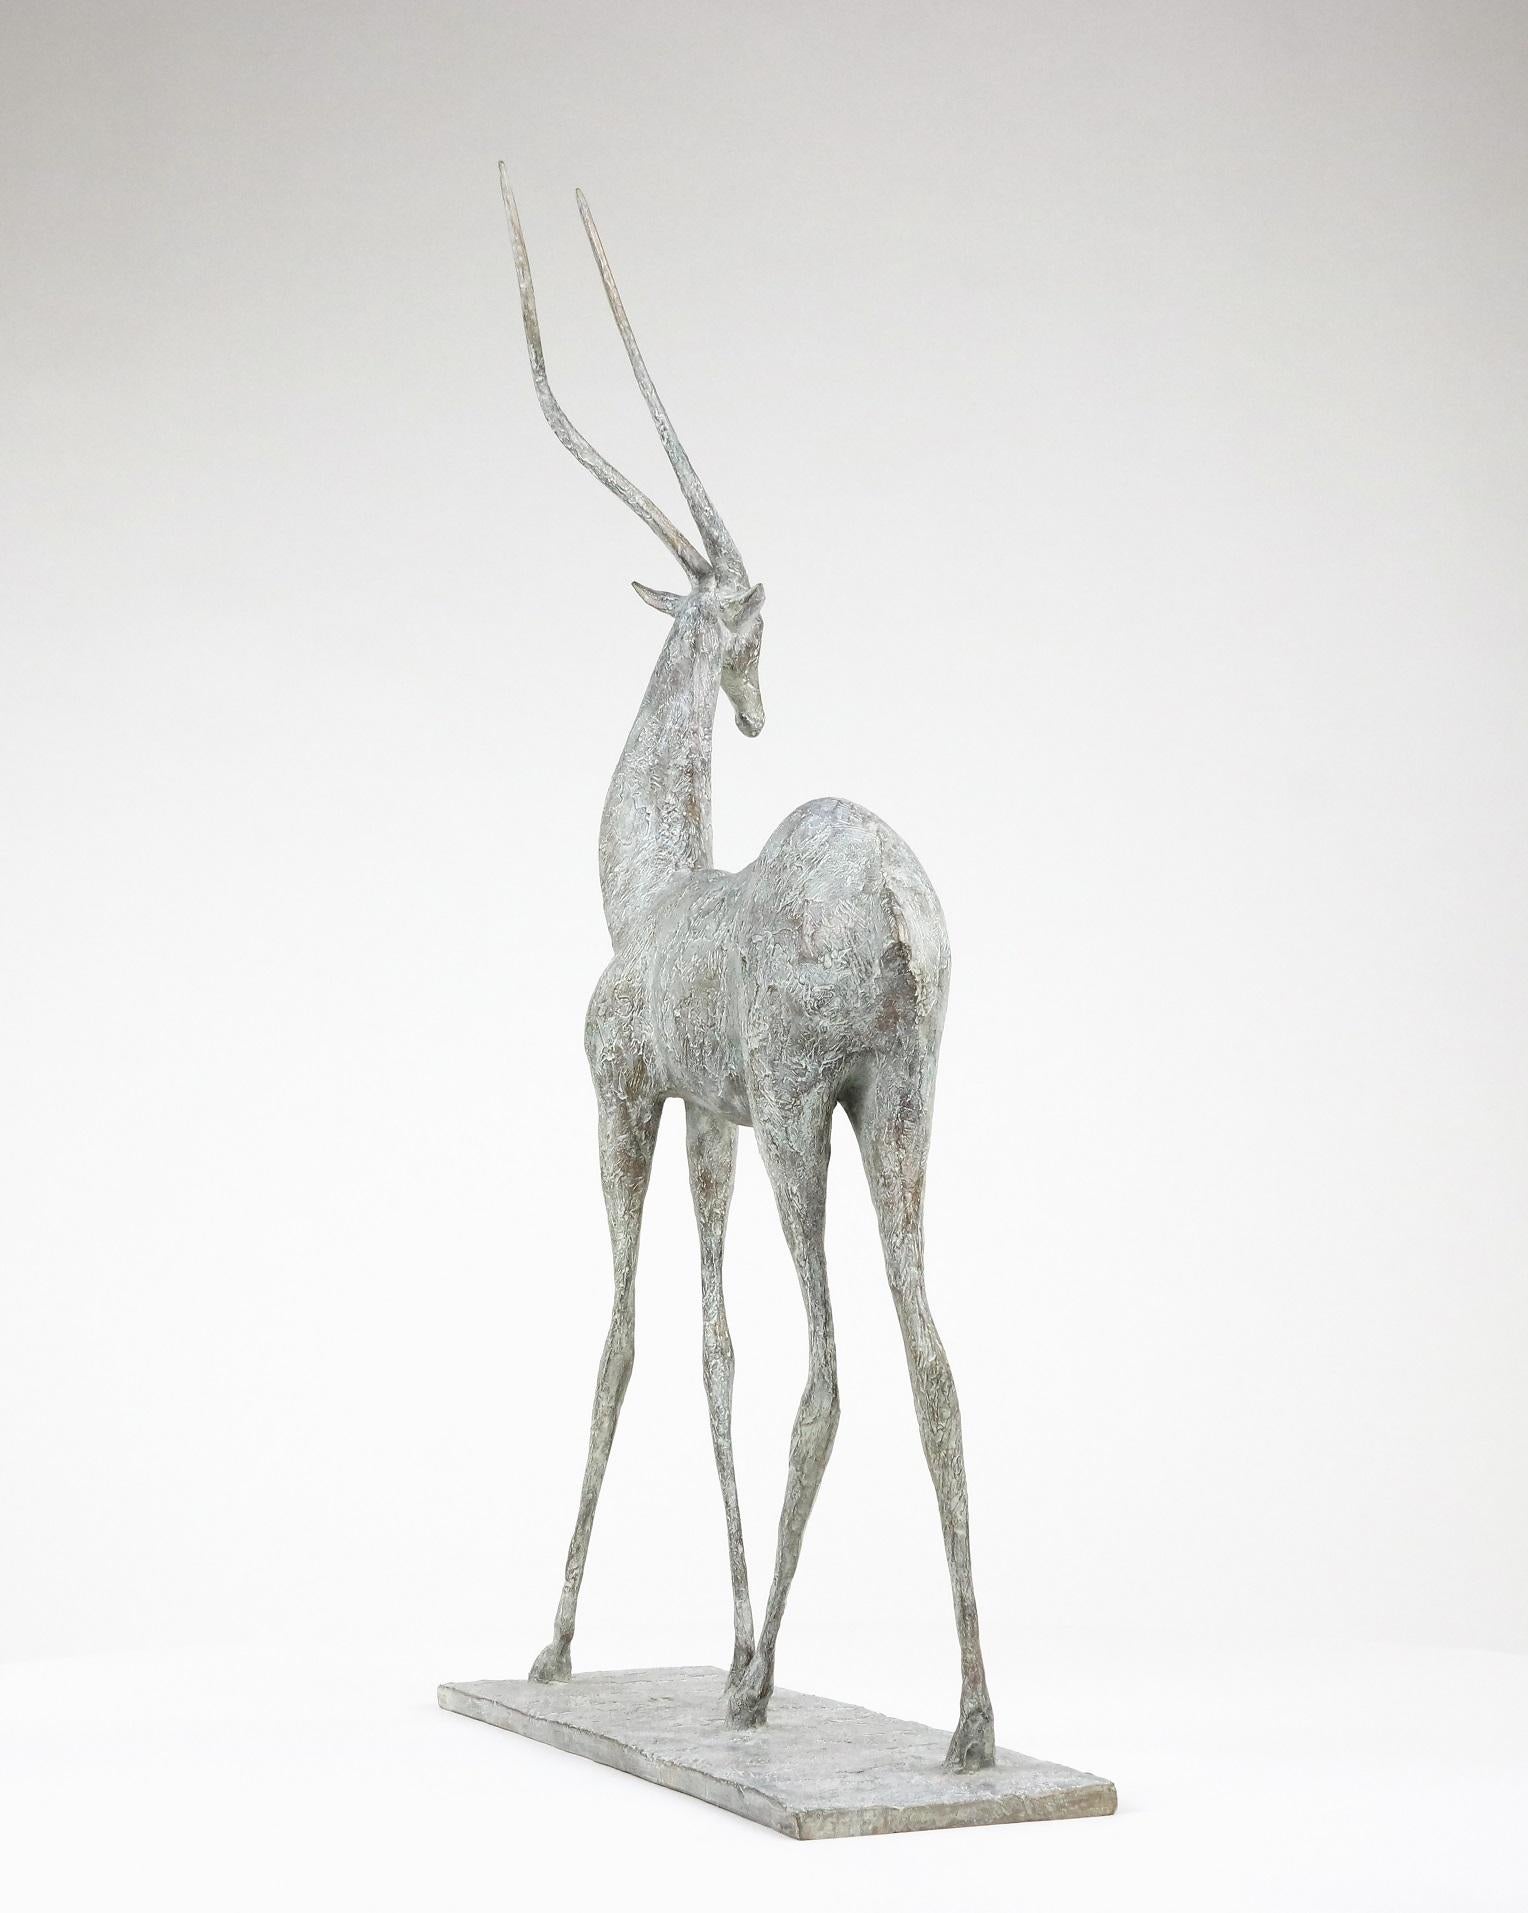 Gazelle I, by French contemporary artist Pierre Yermia.
Bronze, 70 cm × 40 cm × 20 cm.  Limited edition of 8 + 4 artist’s proofs, each signed and numbered.
This bronze sculpture represents a gazelle, a slim and elegant animal which is sometimes